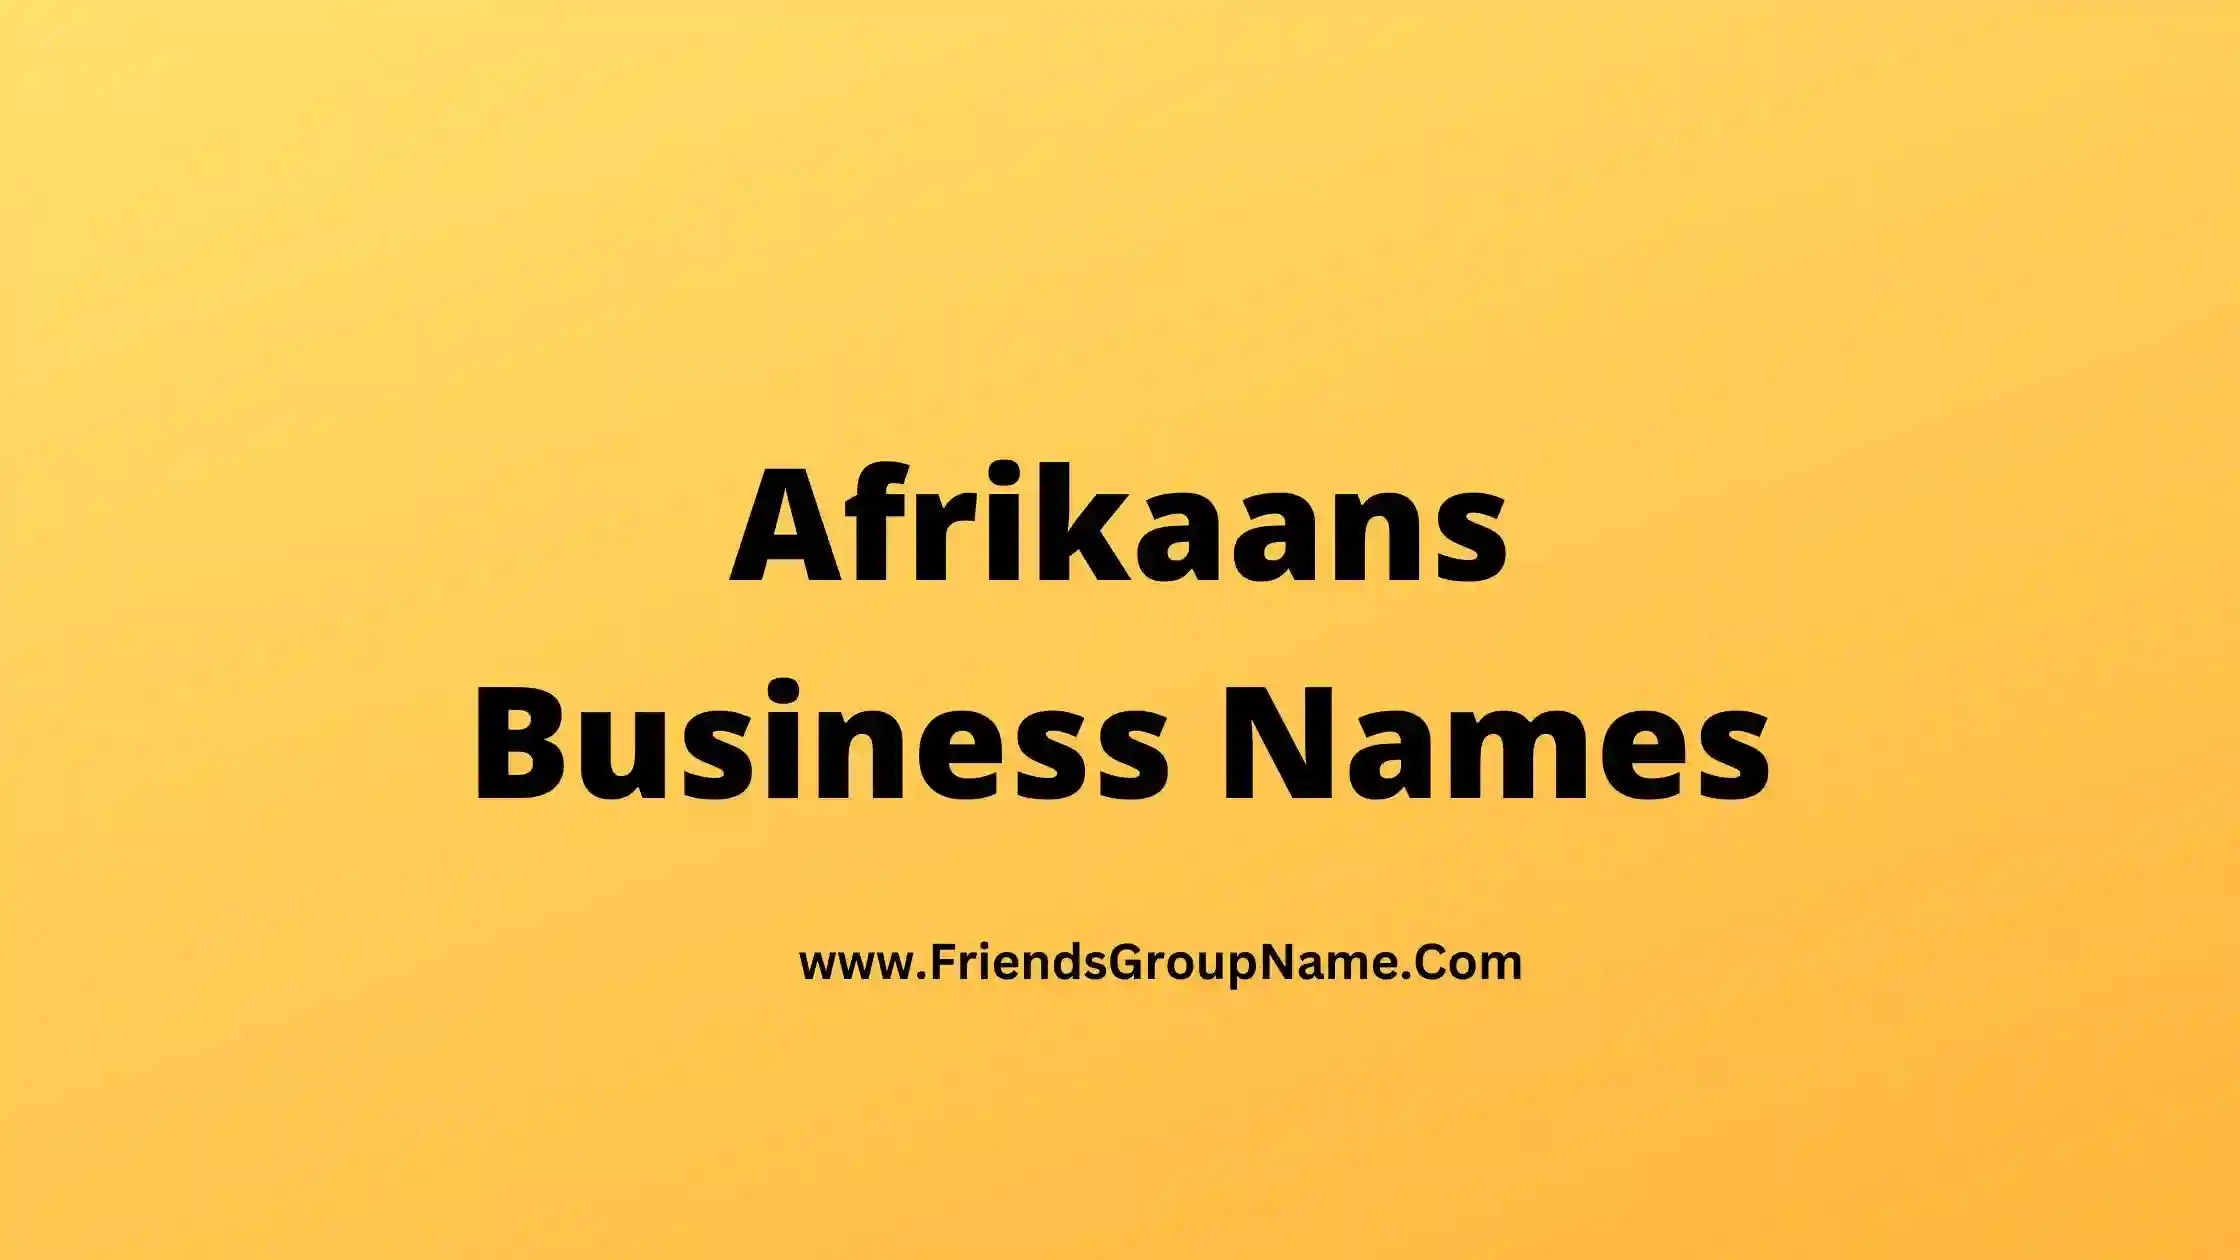 Afrikaans Business Names